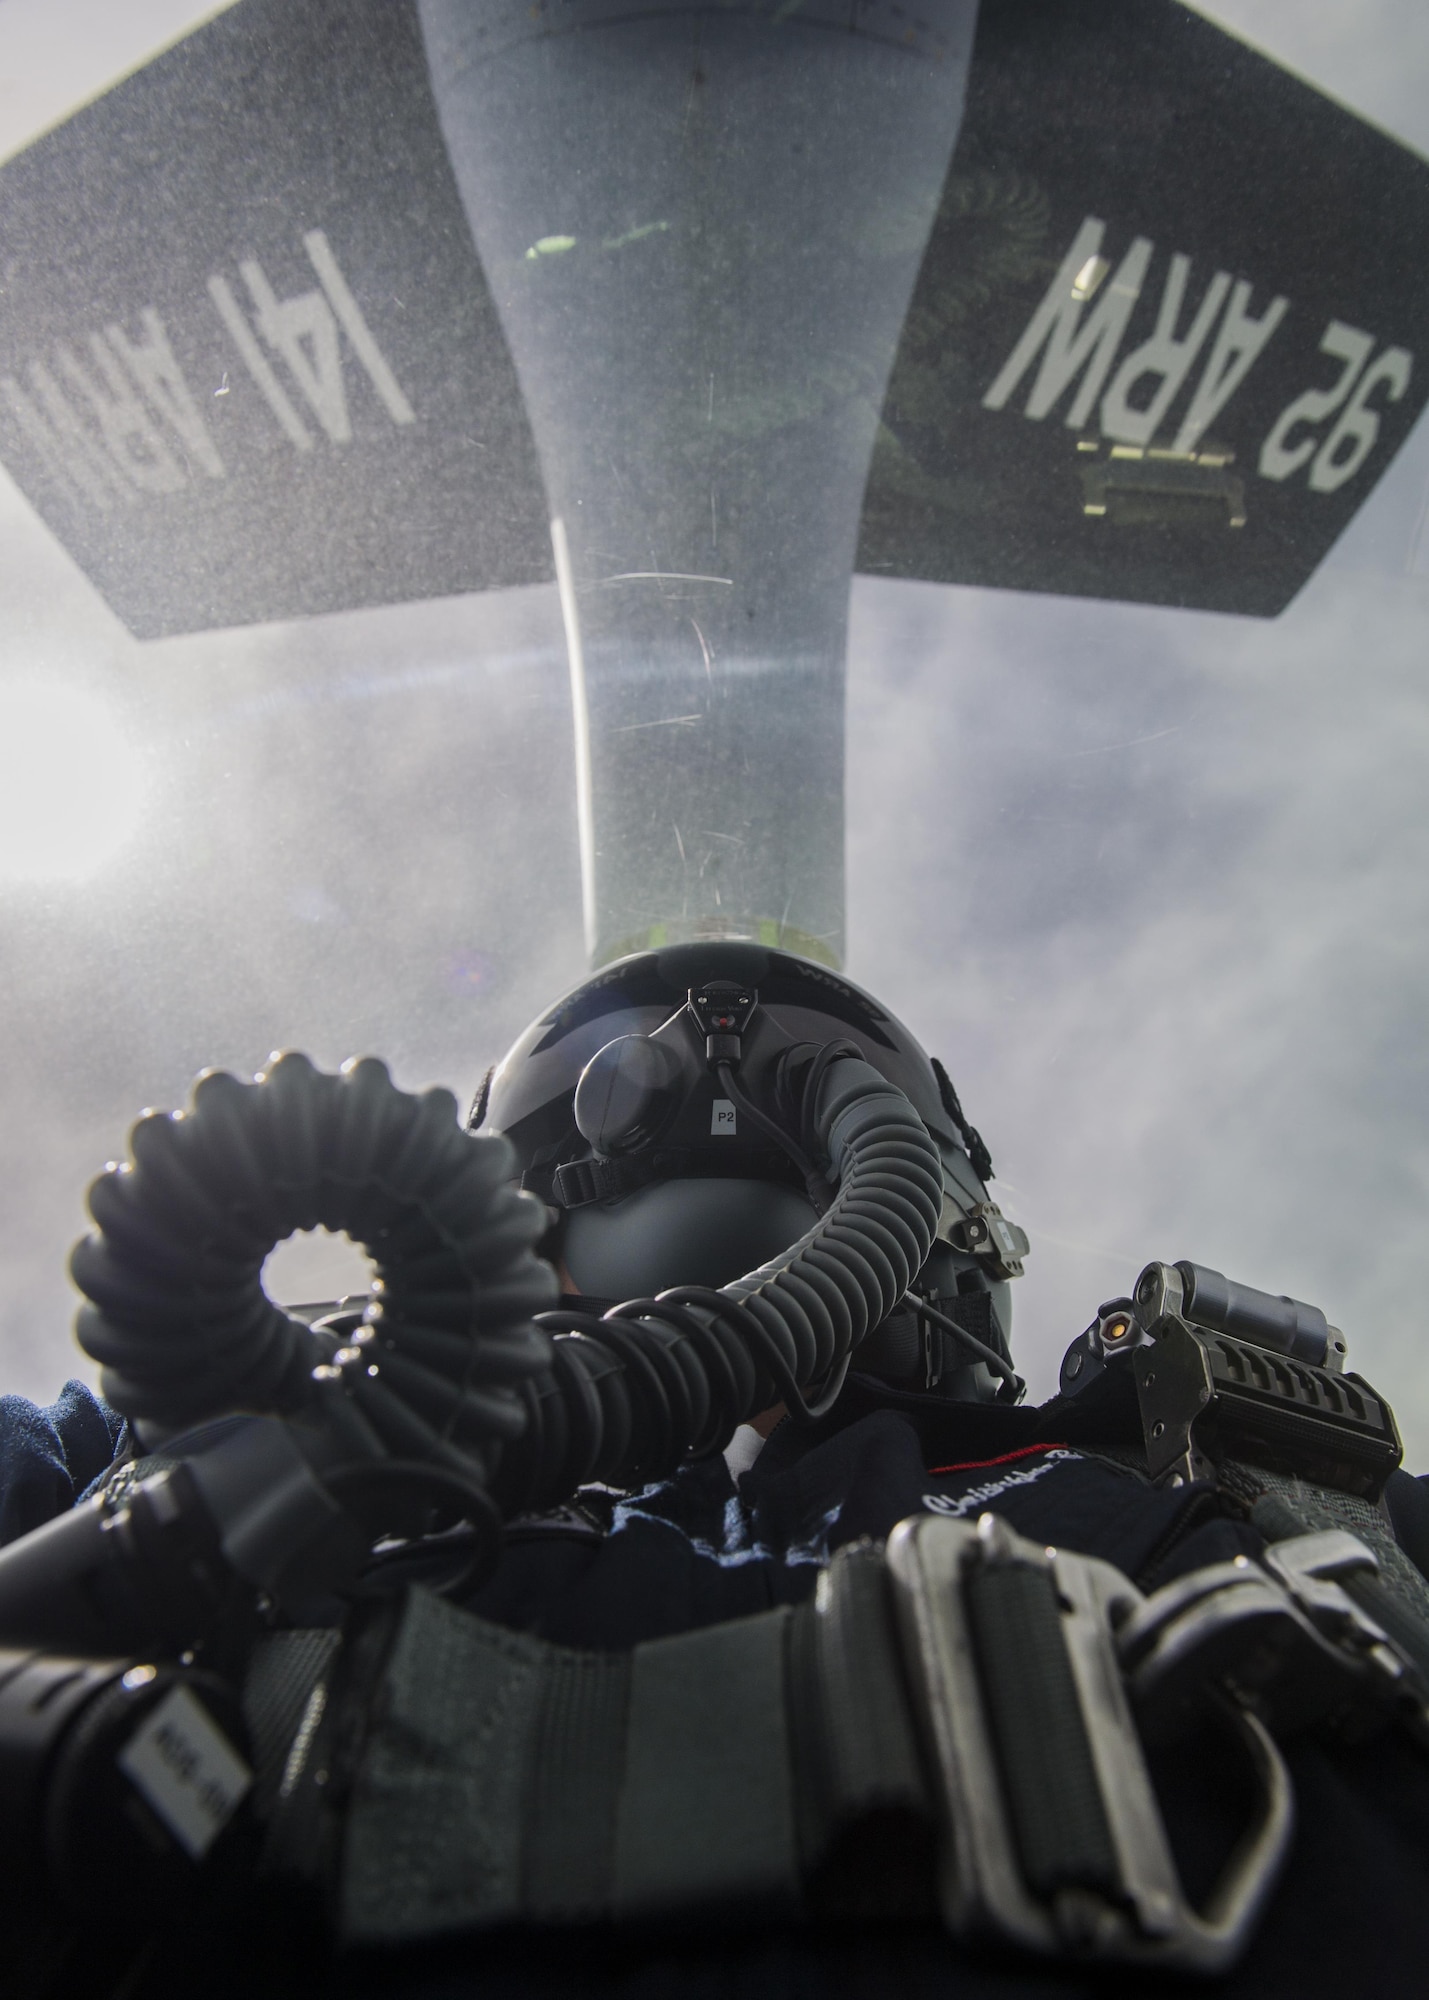 A KC-135 Stratotanker from Fairchild Air Force Base, Wash., refuels a Thunderbird F-16 Fighting Falcon during the air demonstration team’s return to Nellis AFB, Nev., Aug. 29, 2016. The Thunderbirds performed at the Airshow and Warrior Expo at Joint Base Lewis-McChord, Wash., Aug. 27-28. (U.S. Air Force photo/Tech. Sgt. Christopher Boitz)